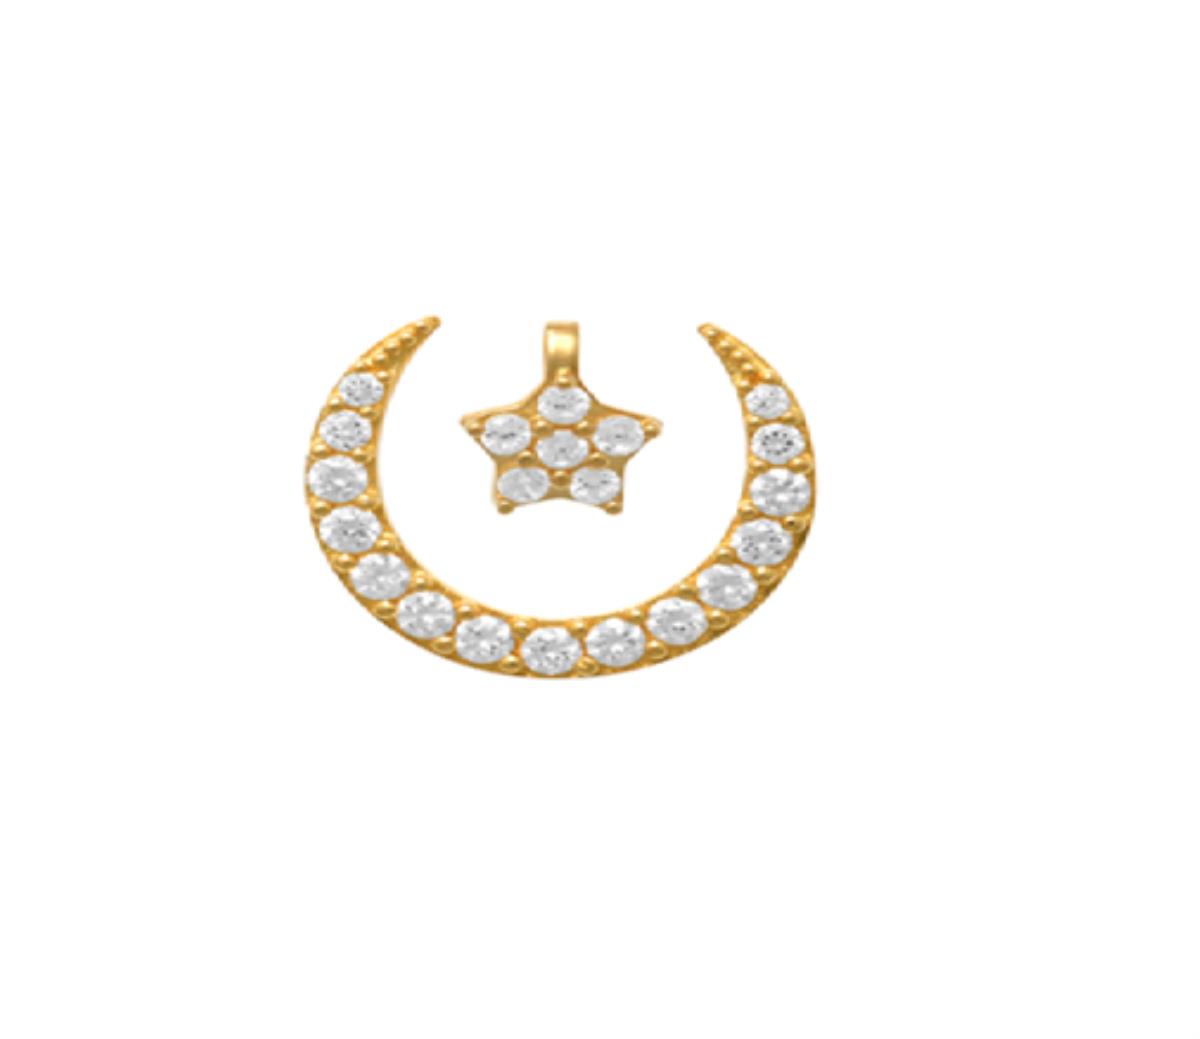 10K Yellow Gold Micropave Half Circle & Petite Star 18" Necklace